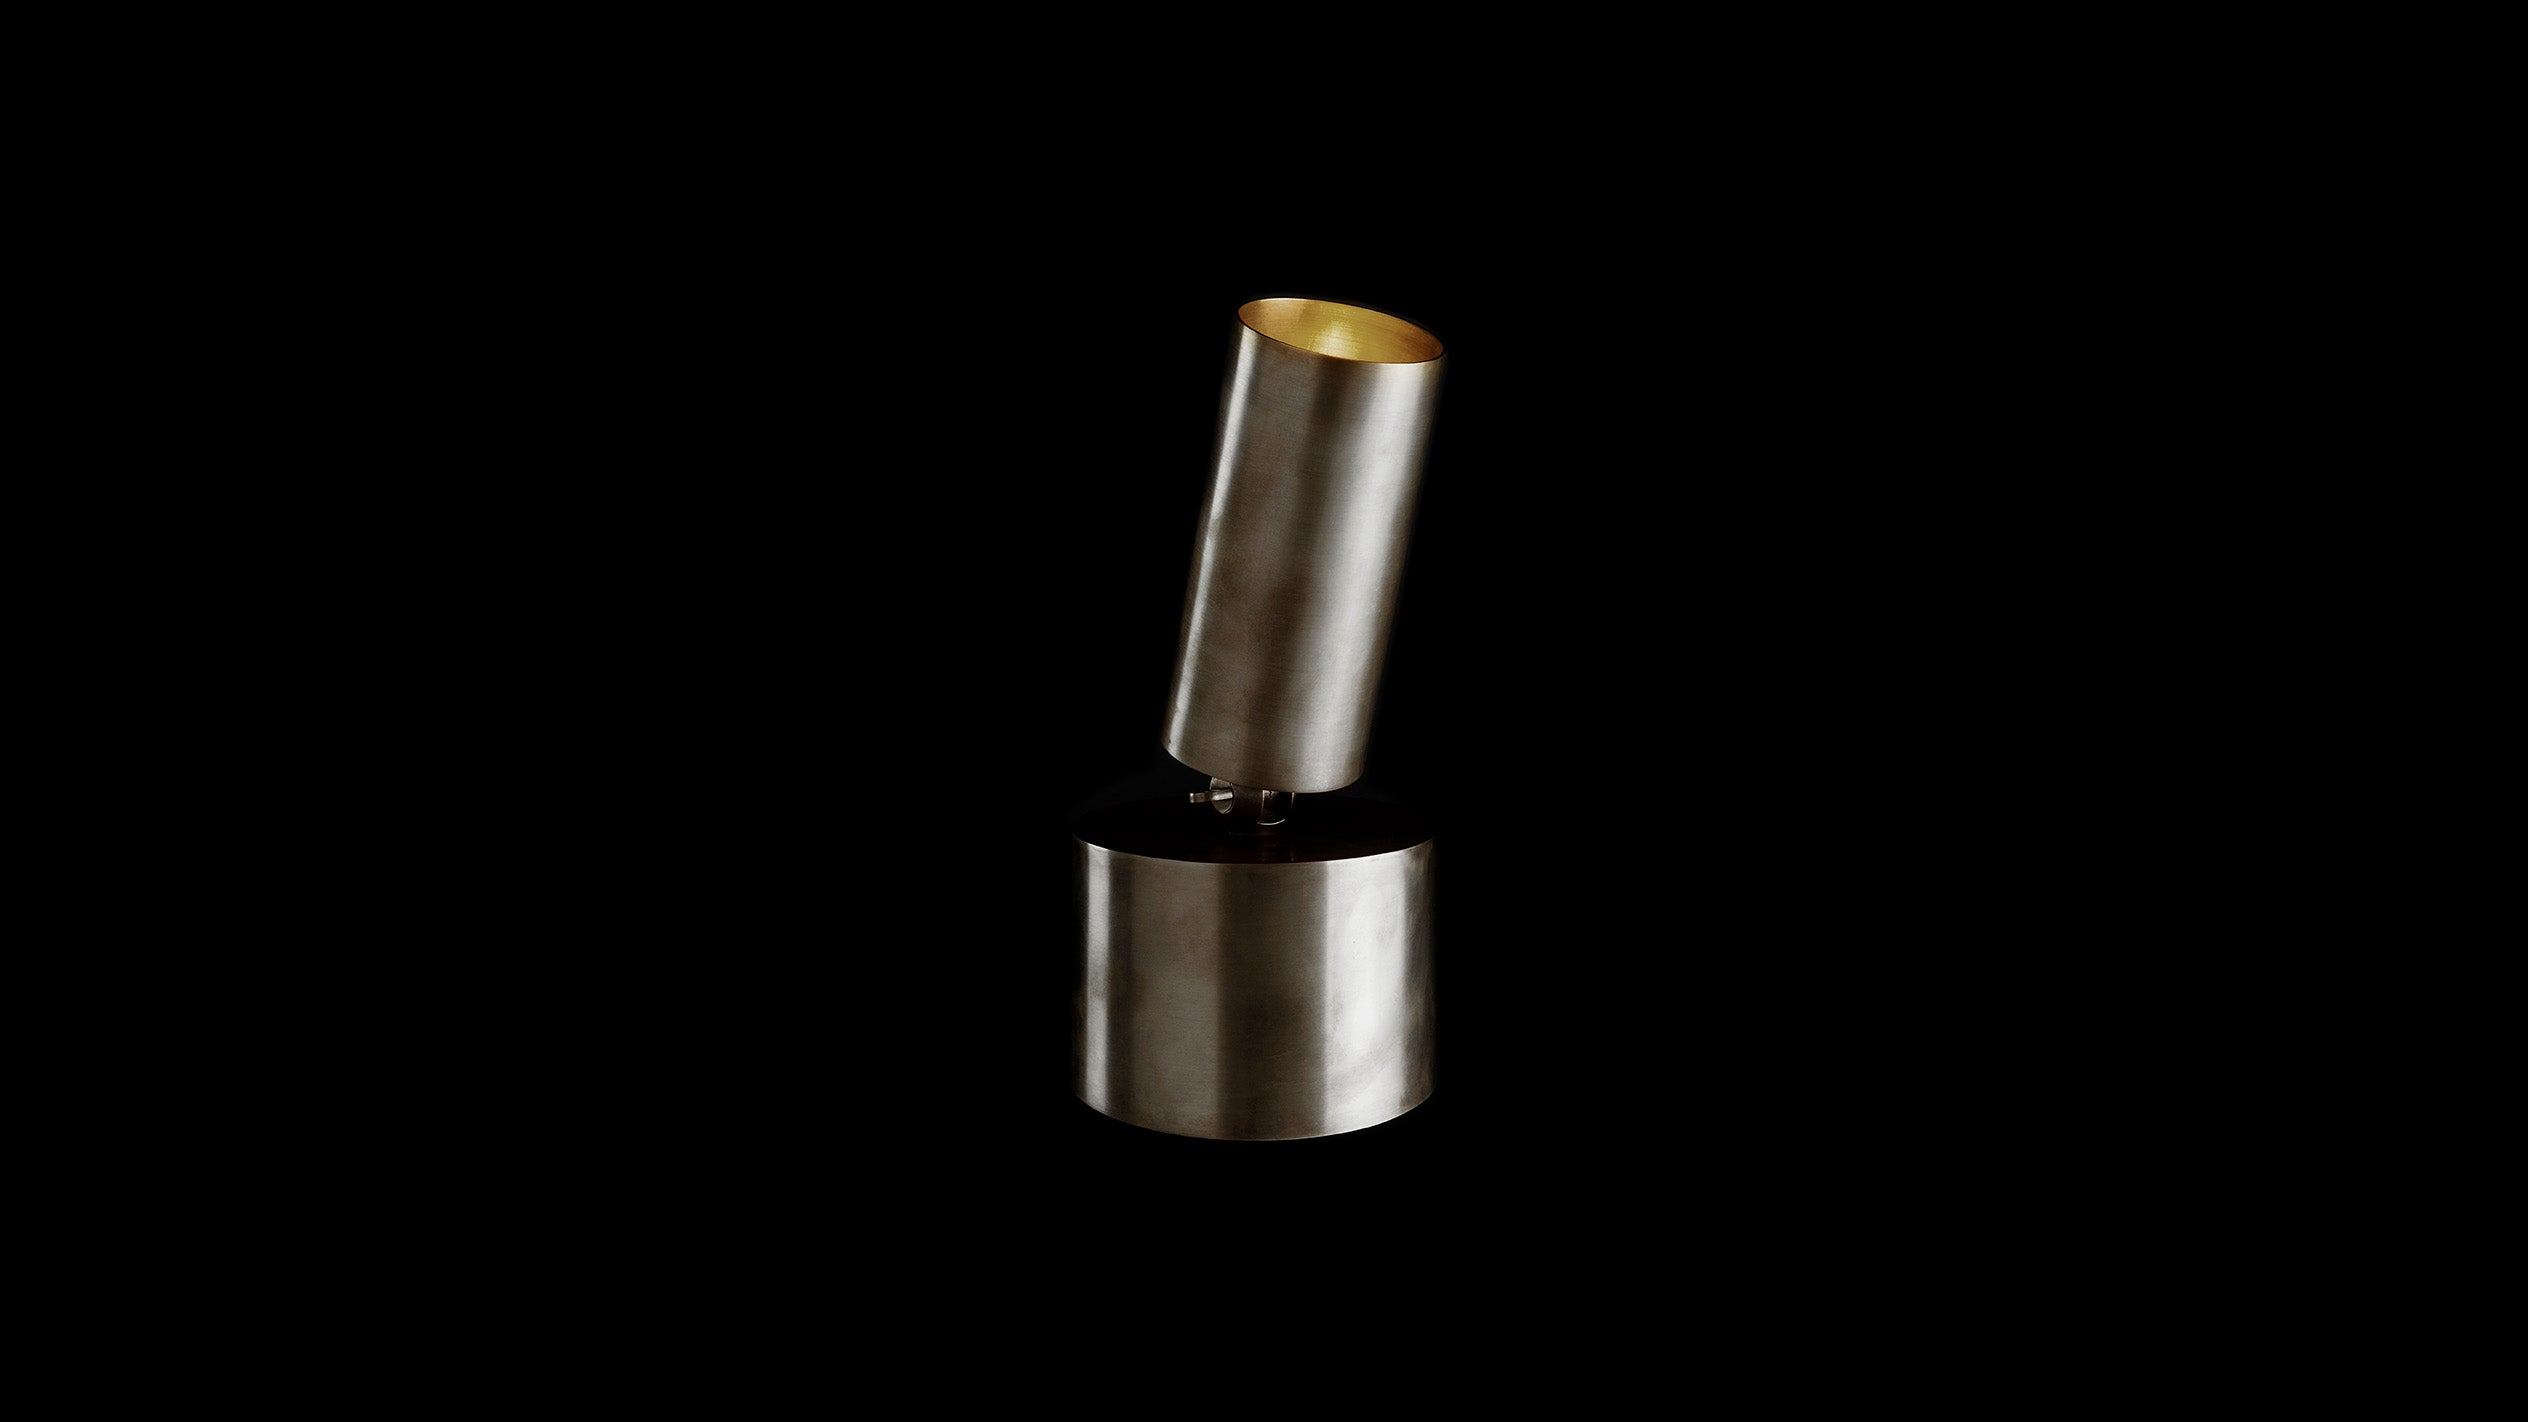 CYLINDER directional table lamp in Tarnished Silver finish, against a black background. 